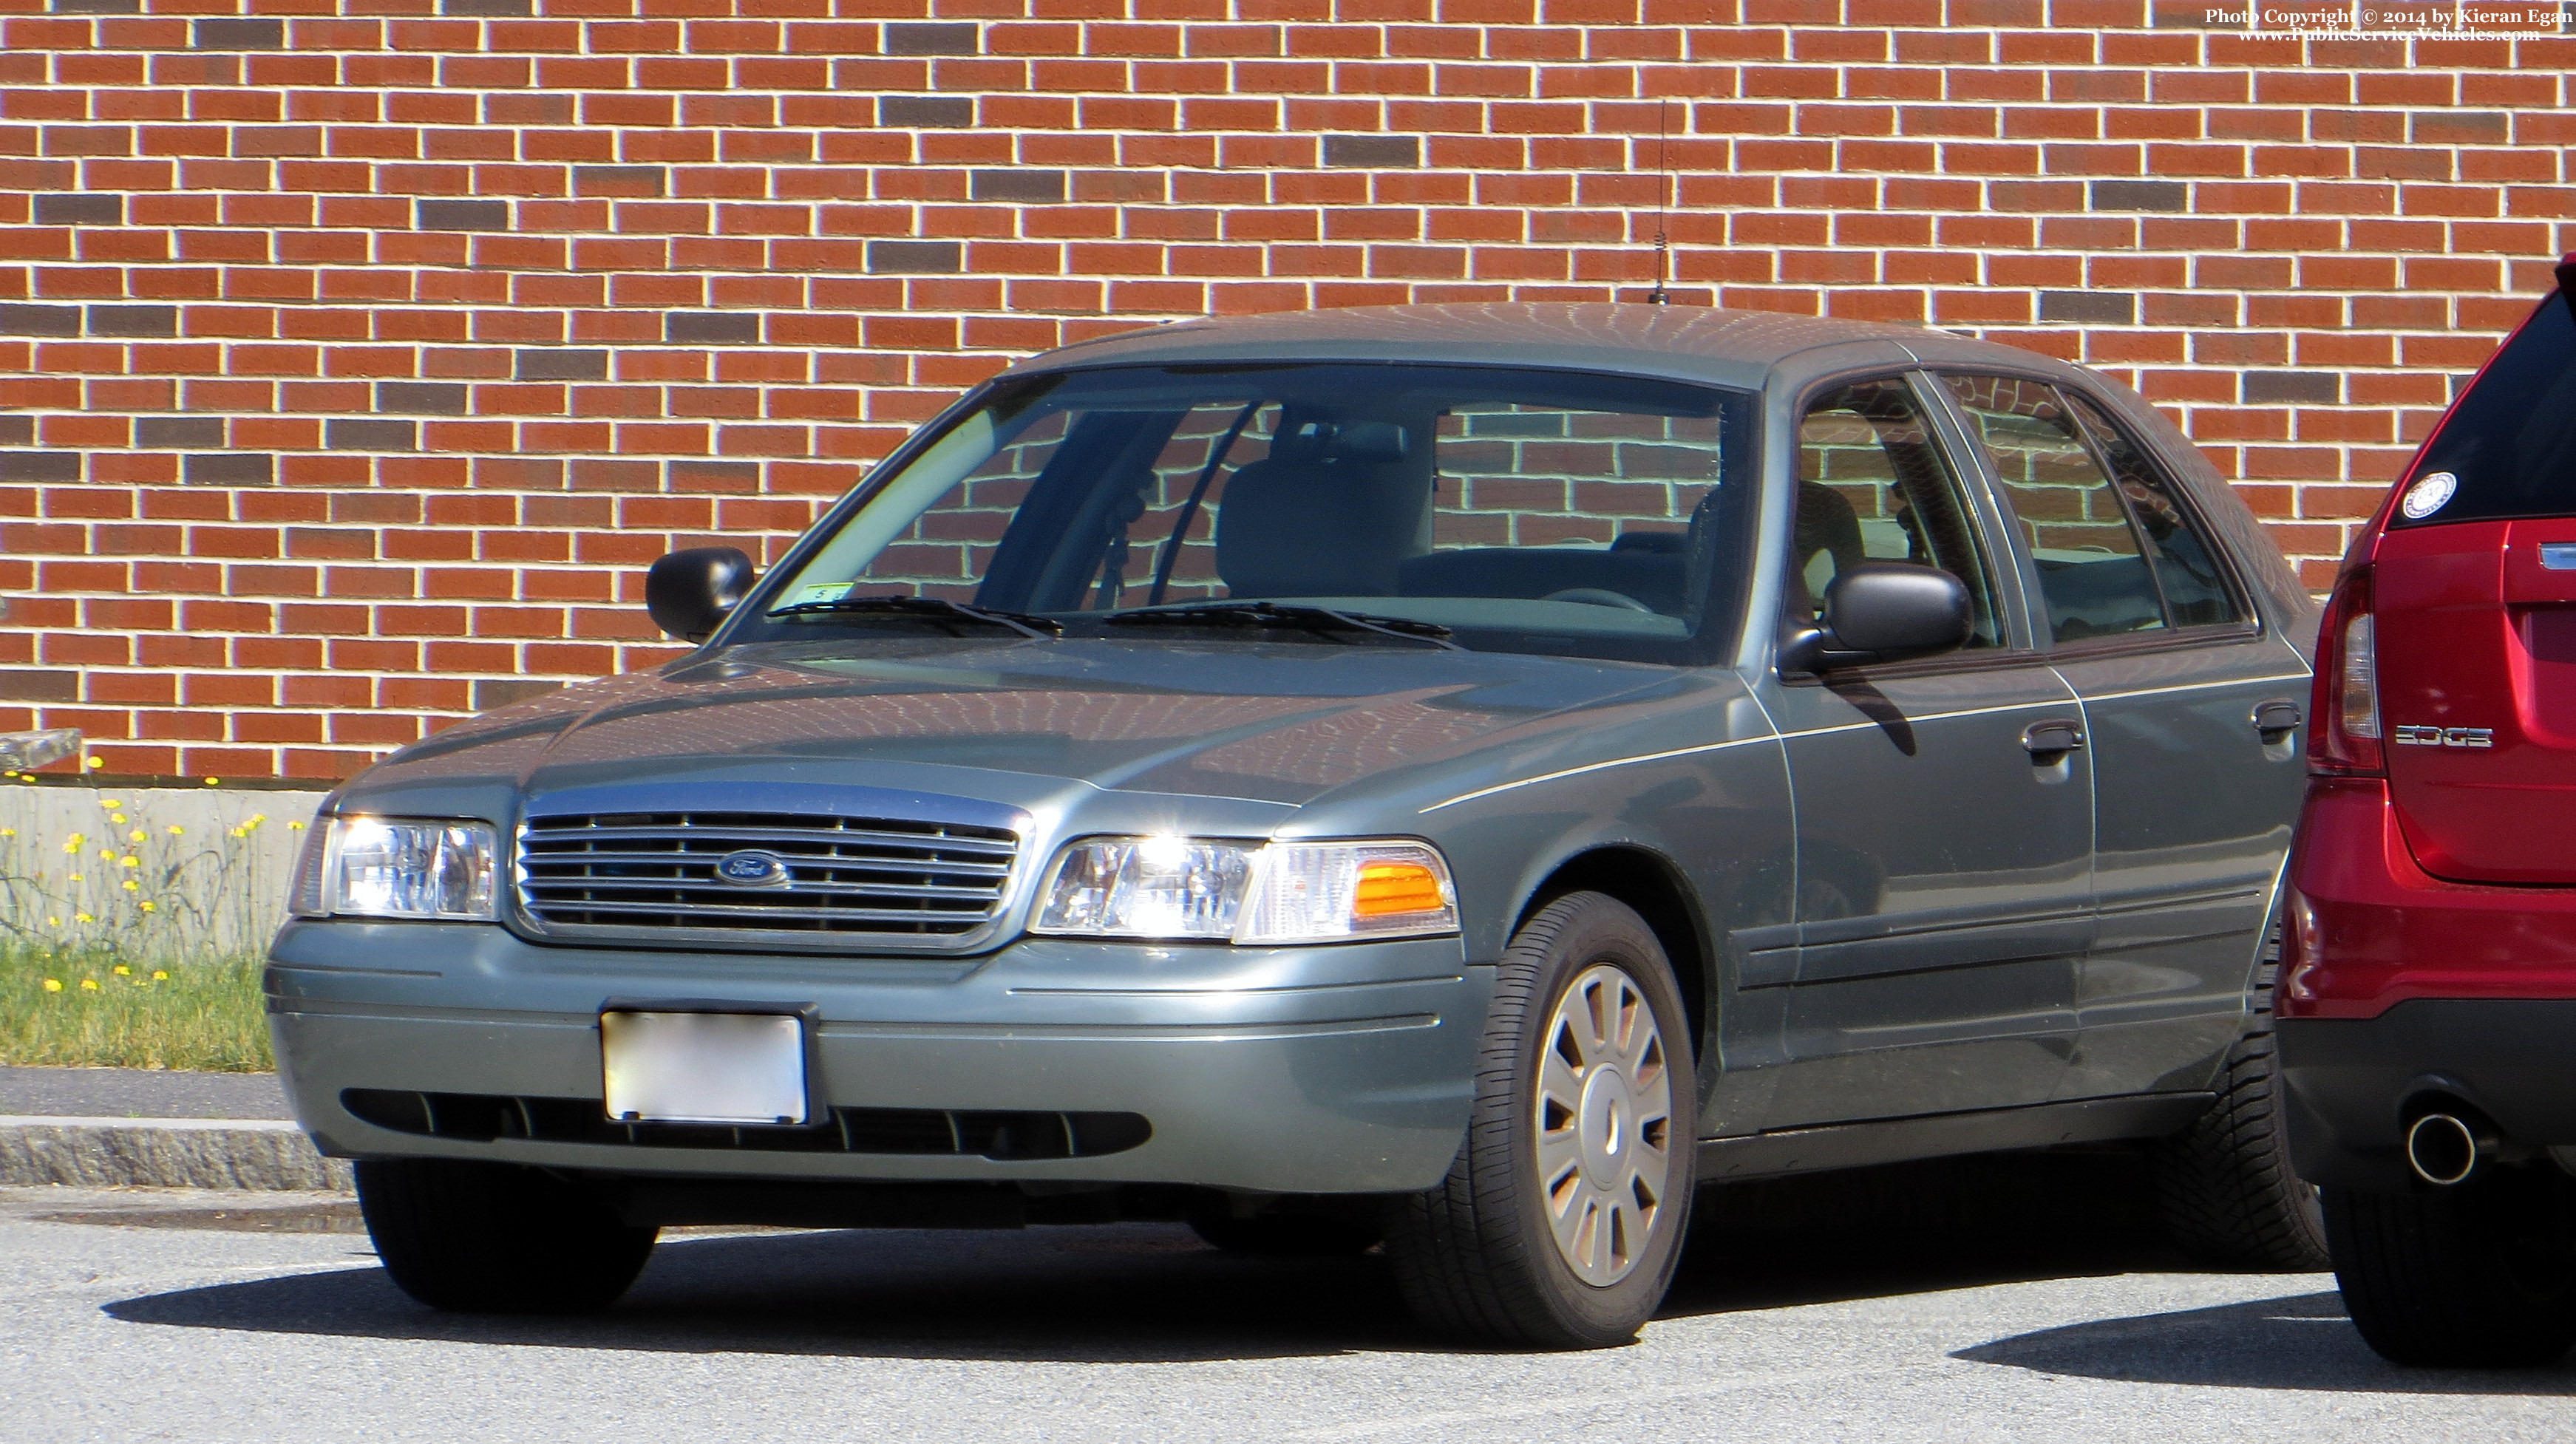 A photo  of Barnstable Police
            Unmarked Unit, a 2006-2011 Ford Crown Victoria             taken by Kieran Egan